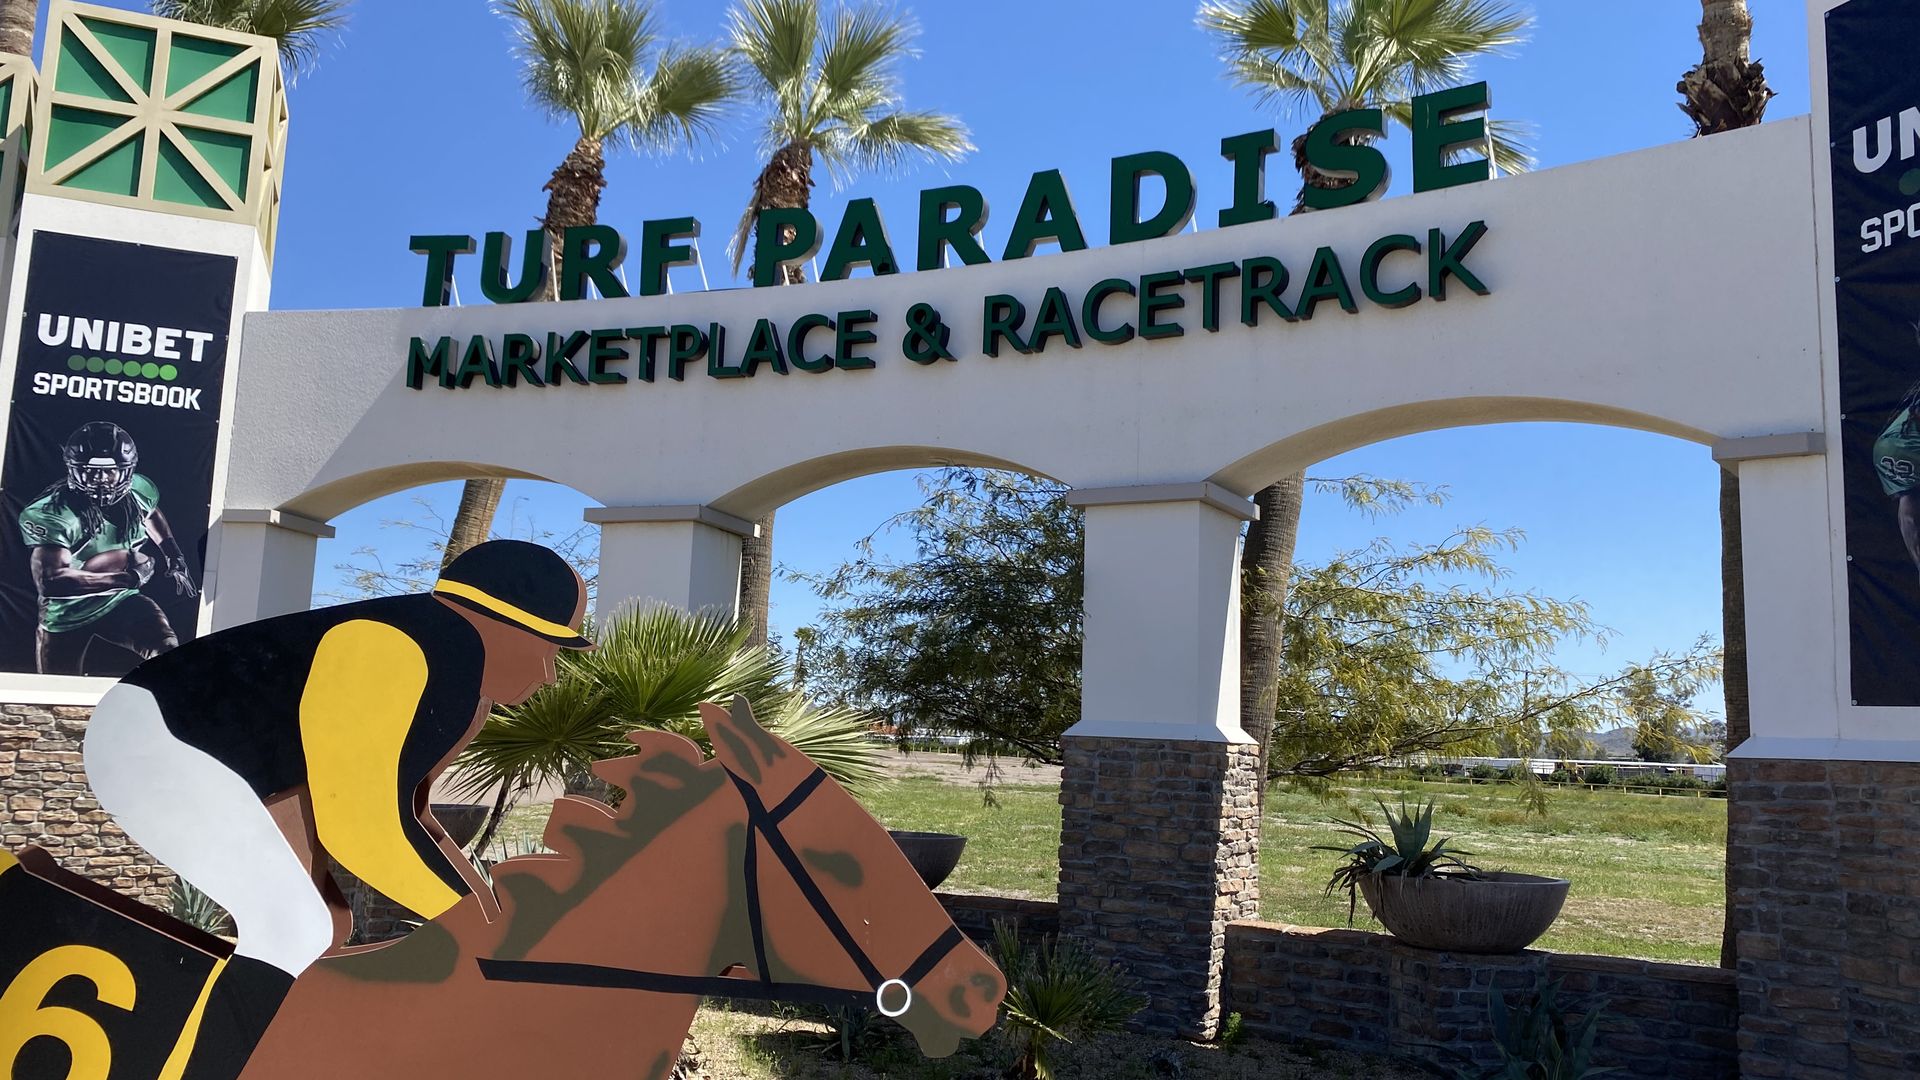 A cutout image of a jockey on a horse in front of a sign reading Turf Paradise marketplace and racetrack.